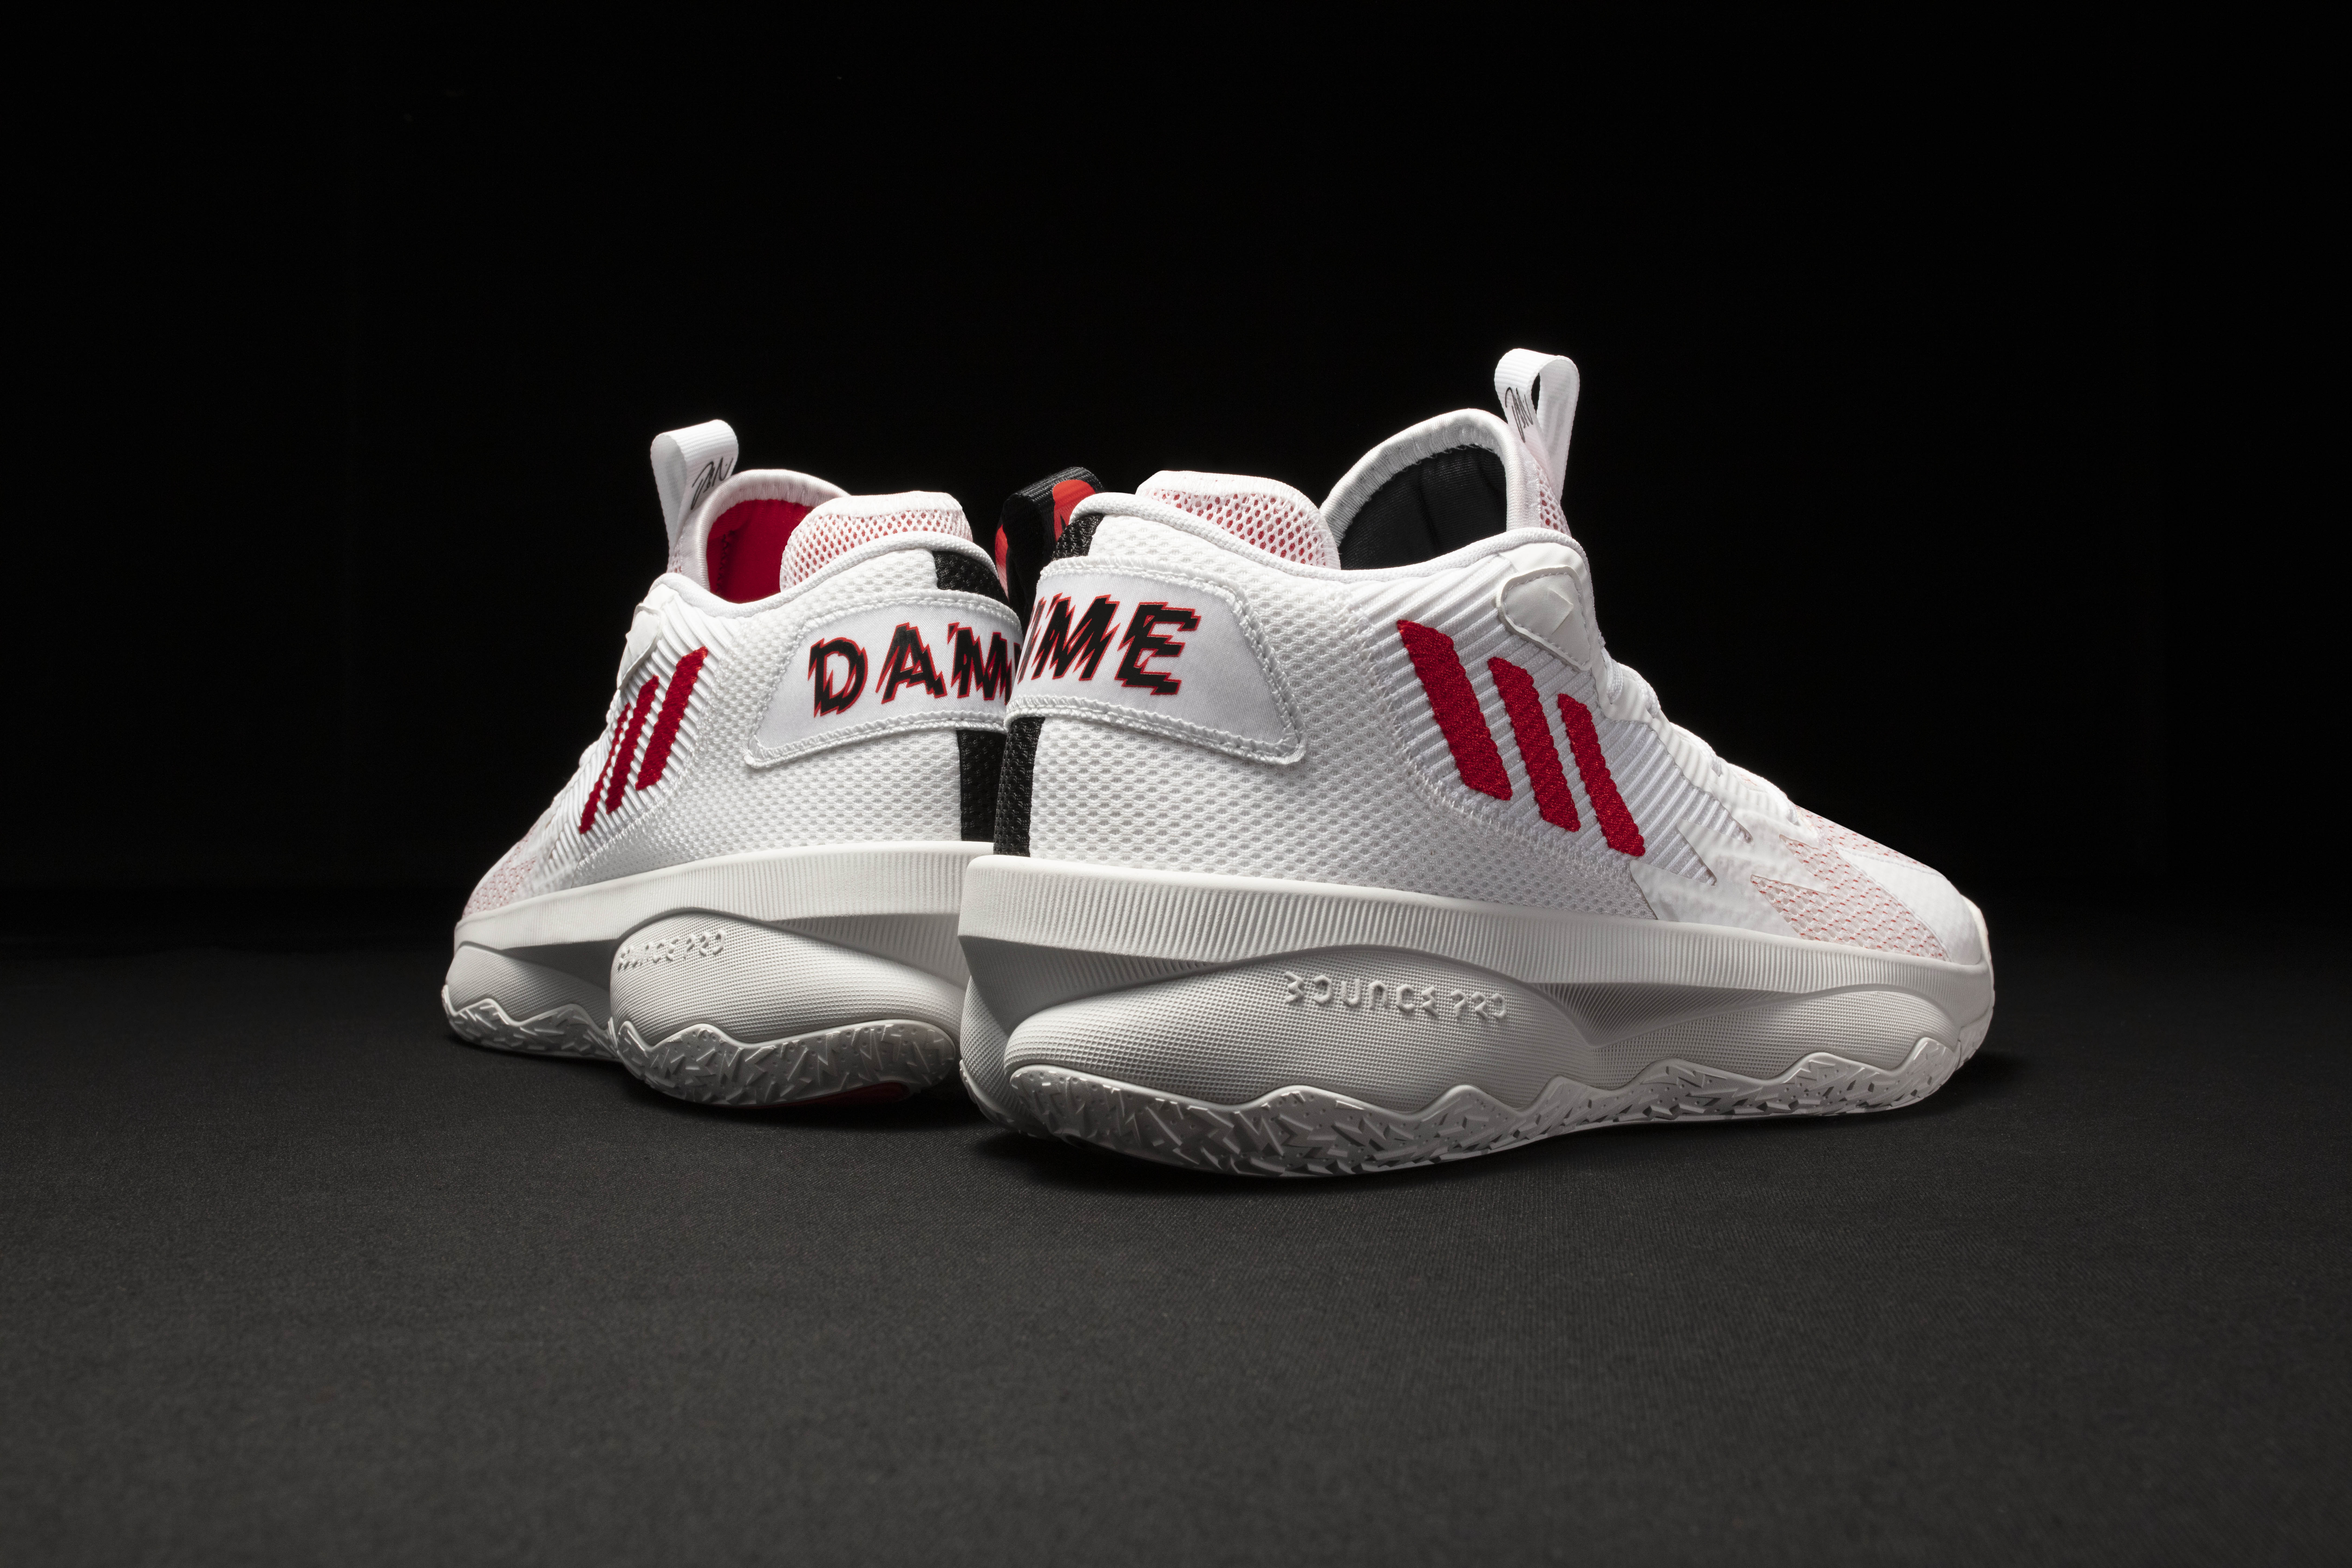 Adidas Releases Damian Lillard's Fourth Signature Sneaker, The Dame 4